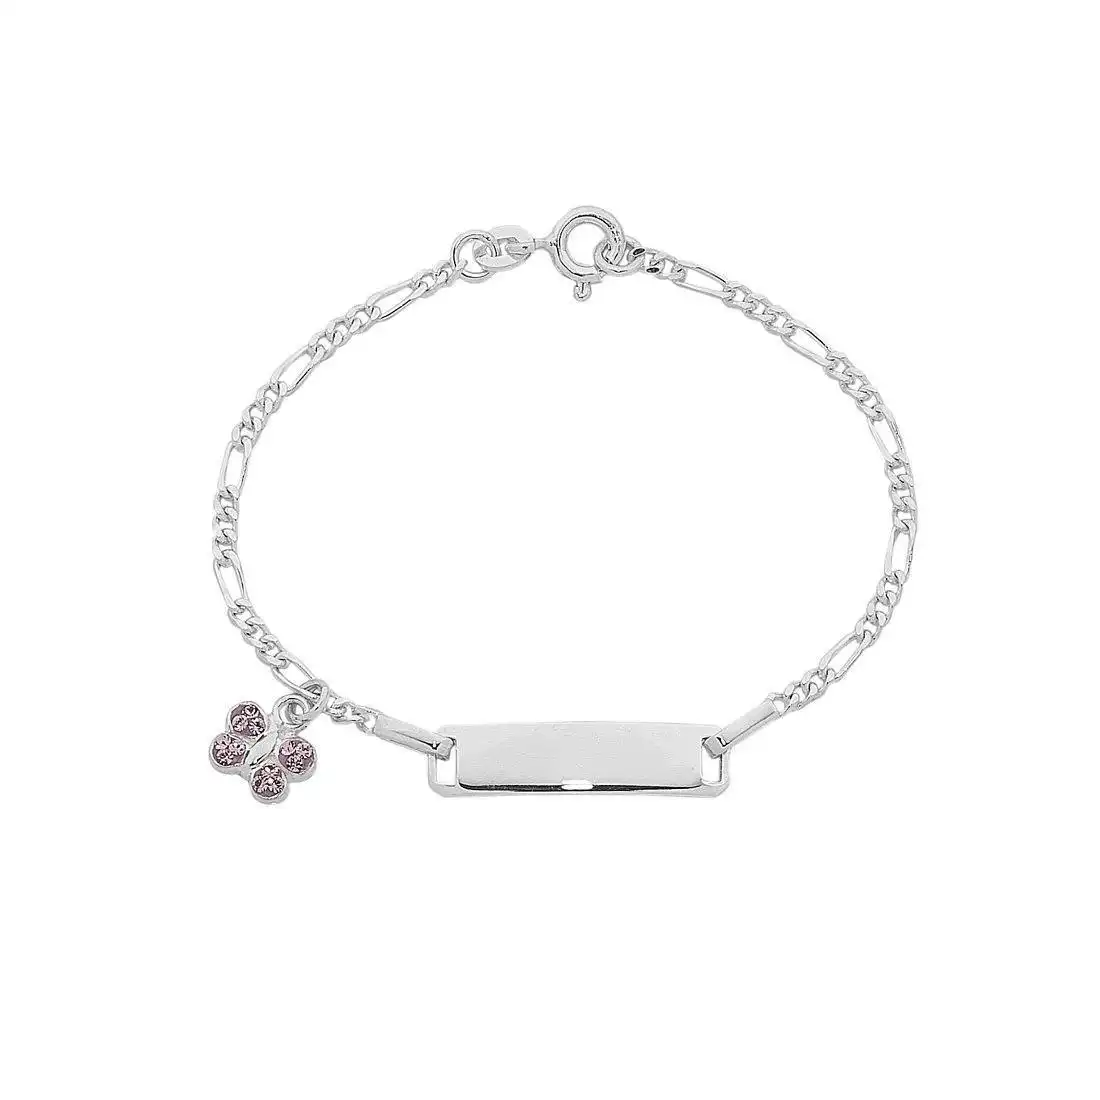 15cm Children's Sterling Silver ID Bracelet with Butterfly Charm